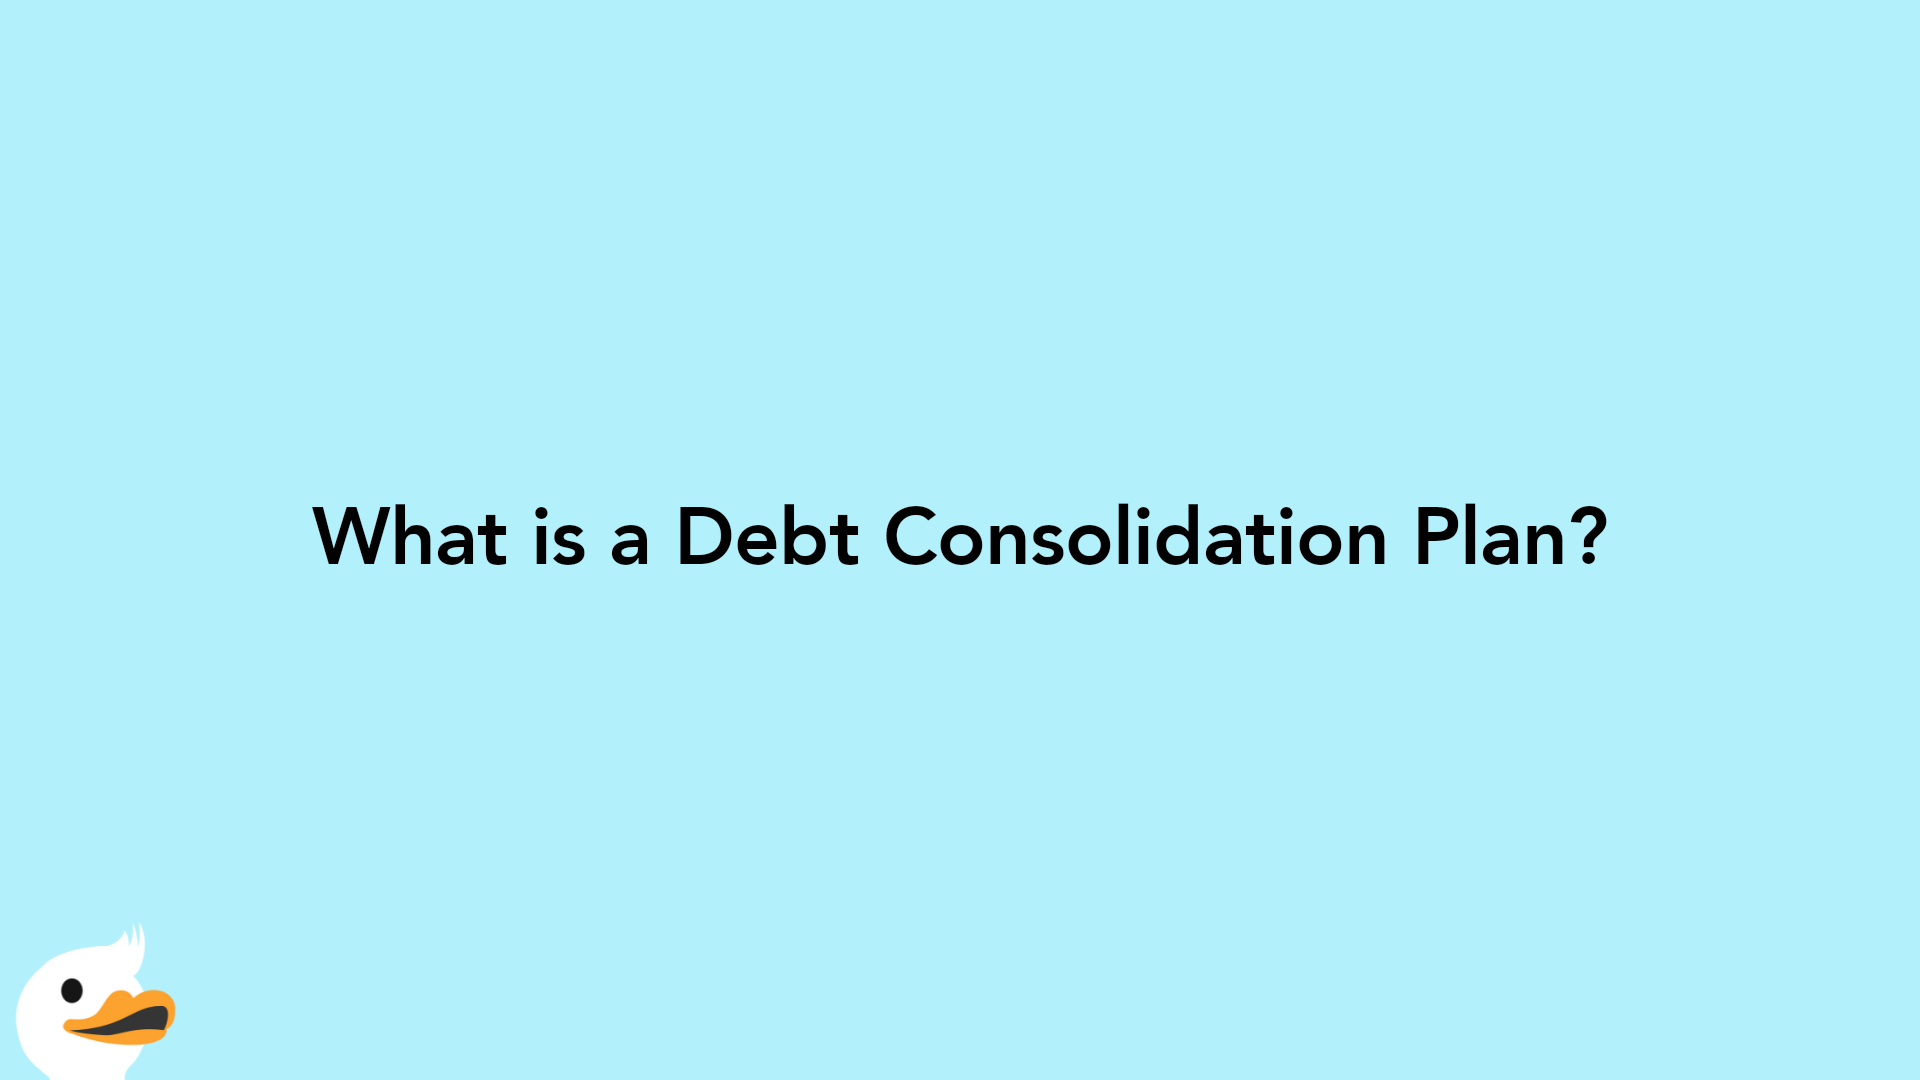 What is a Debt Consolidation Plan?